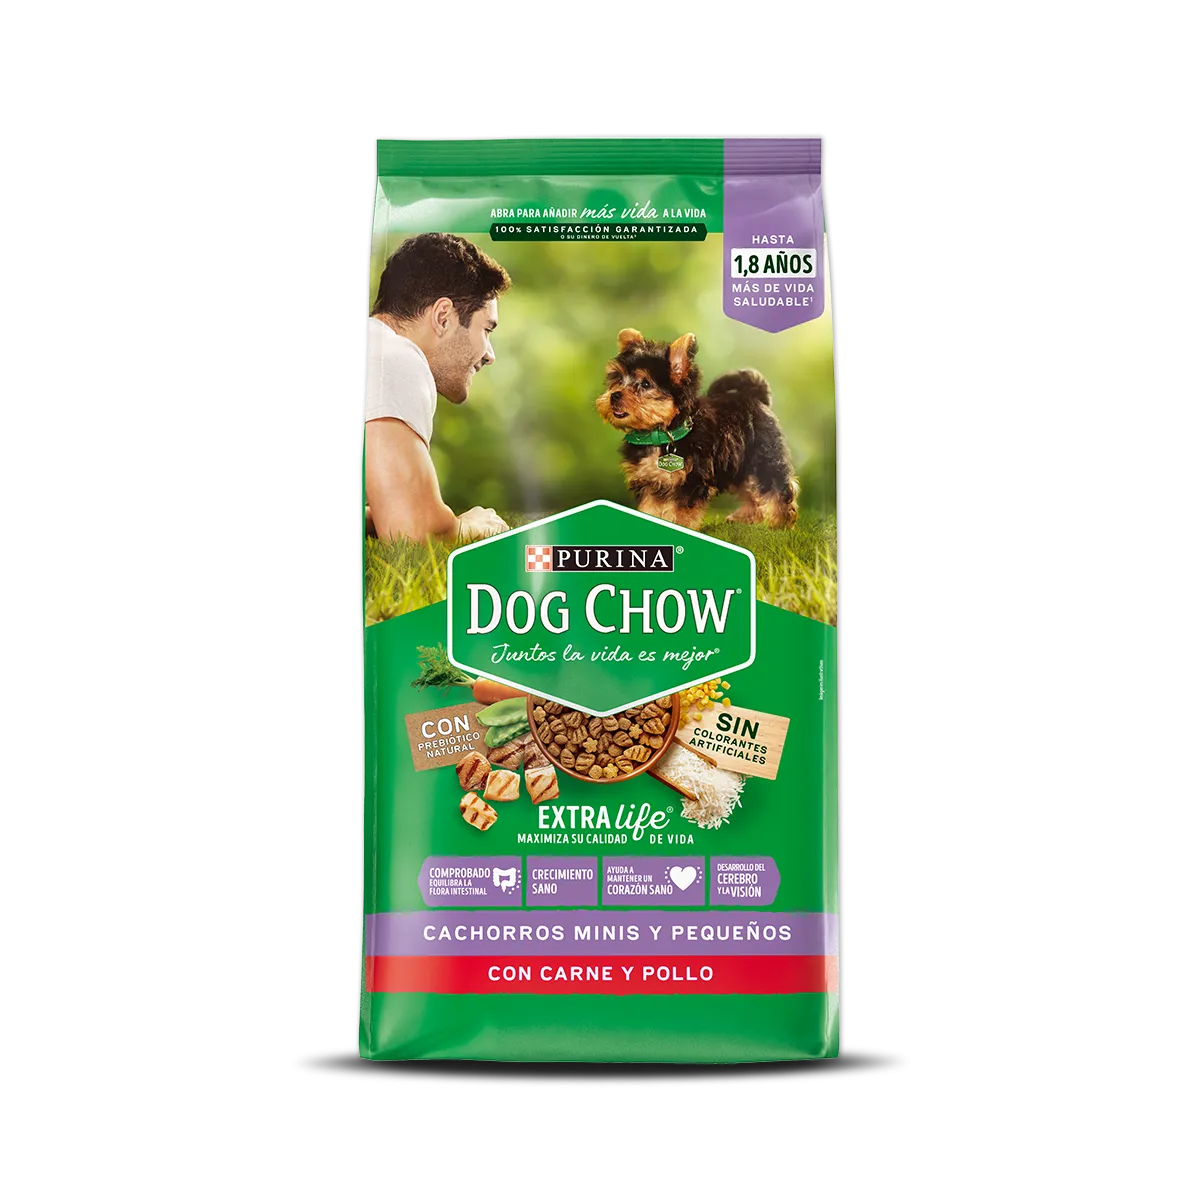 Purina-DogChow-chachorro-minis-colombia